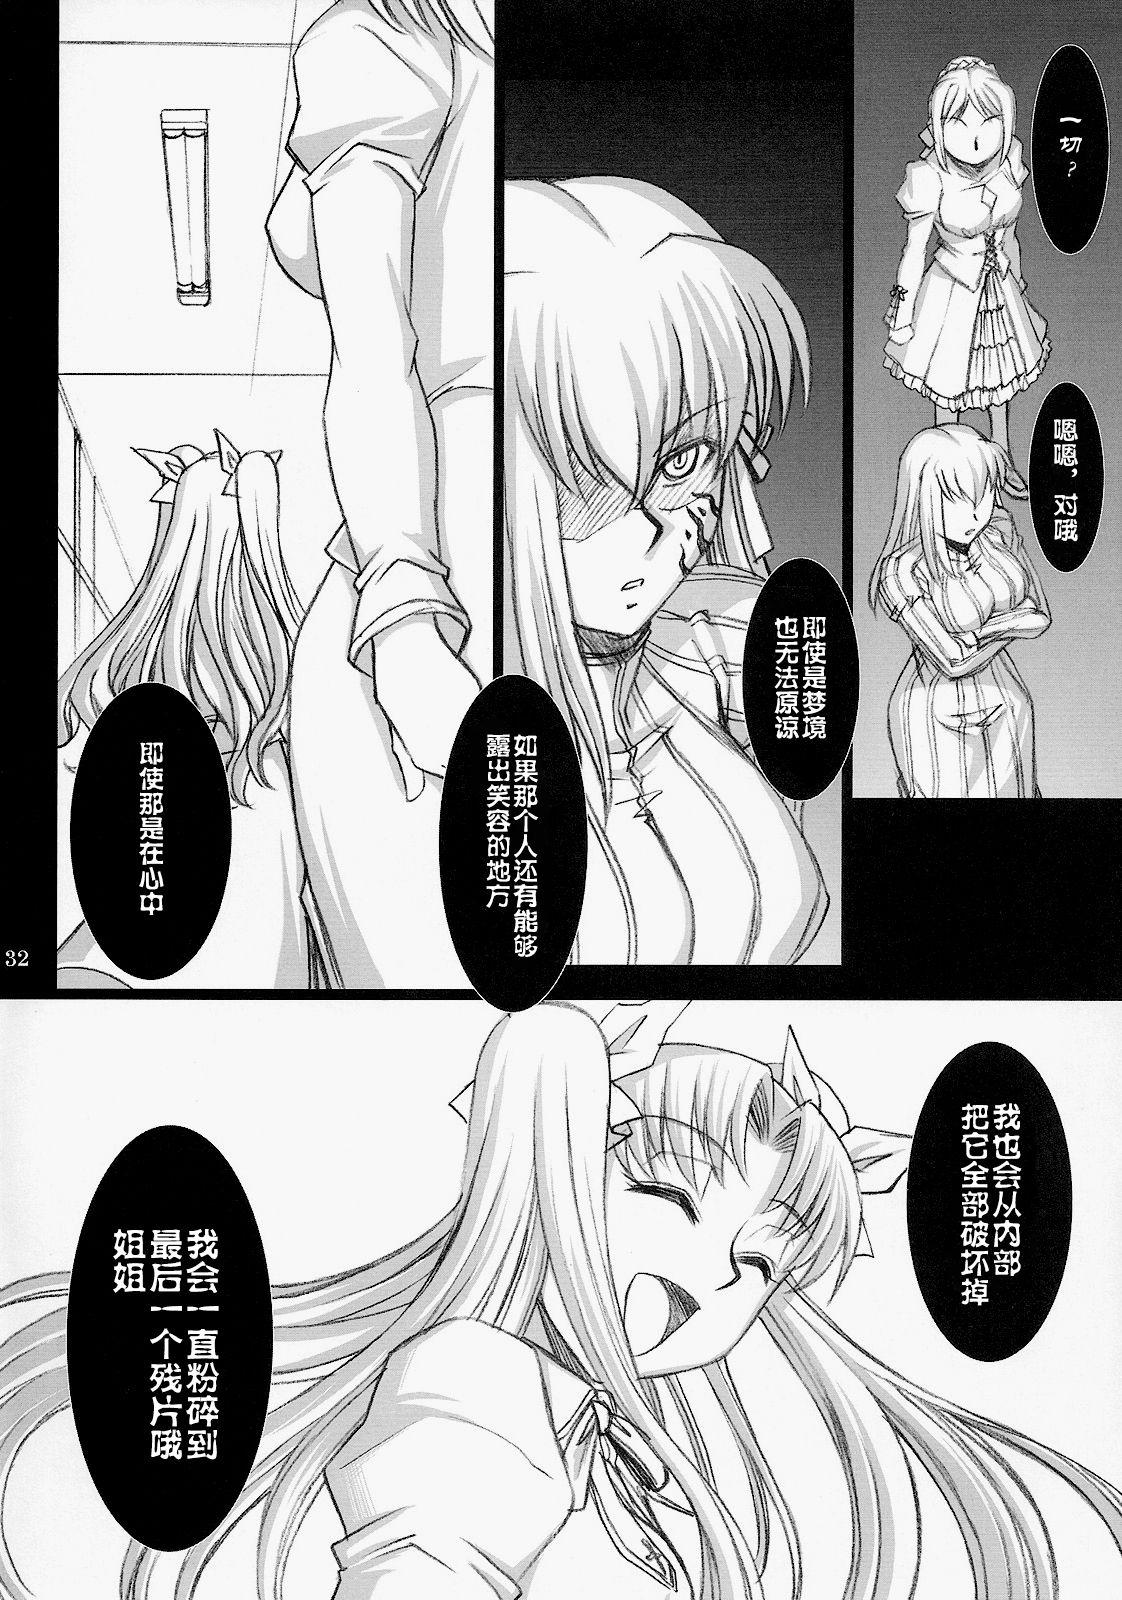 Anime Red Degeneration - Fate stay night Coed - Page 31